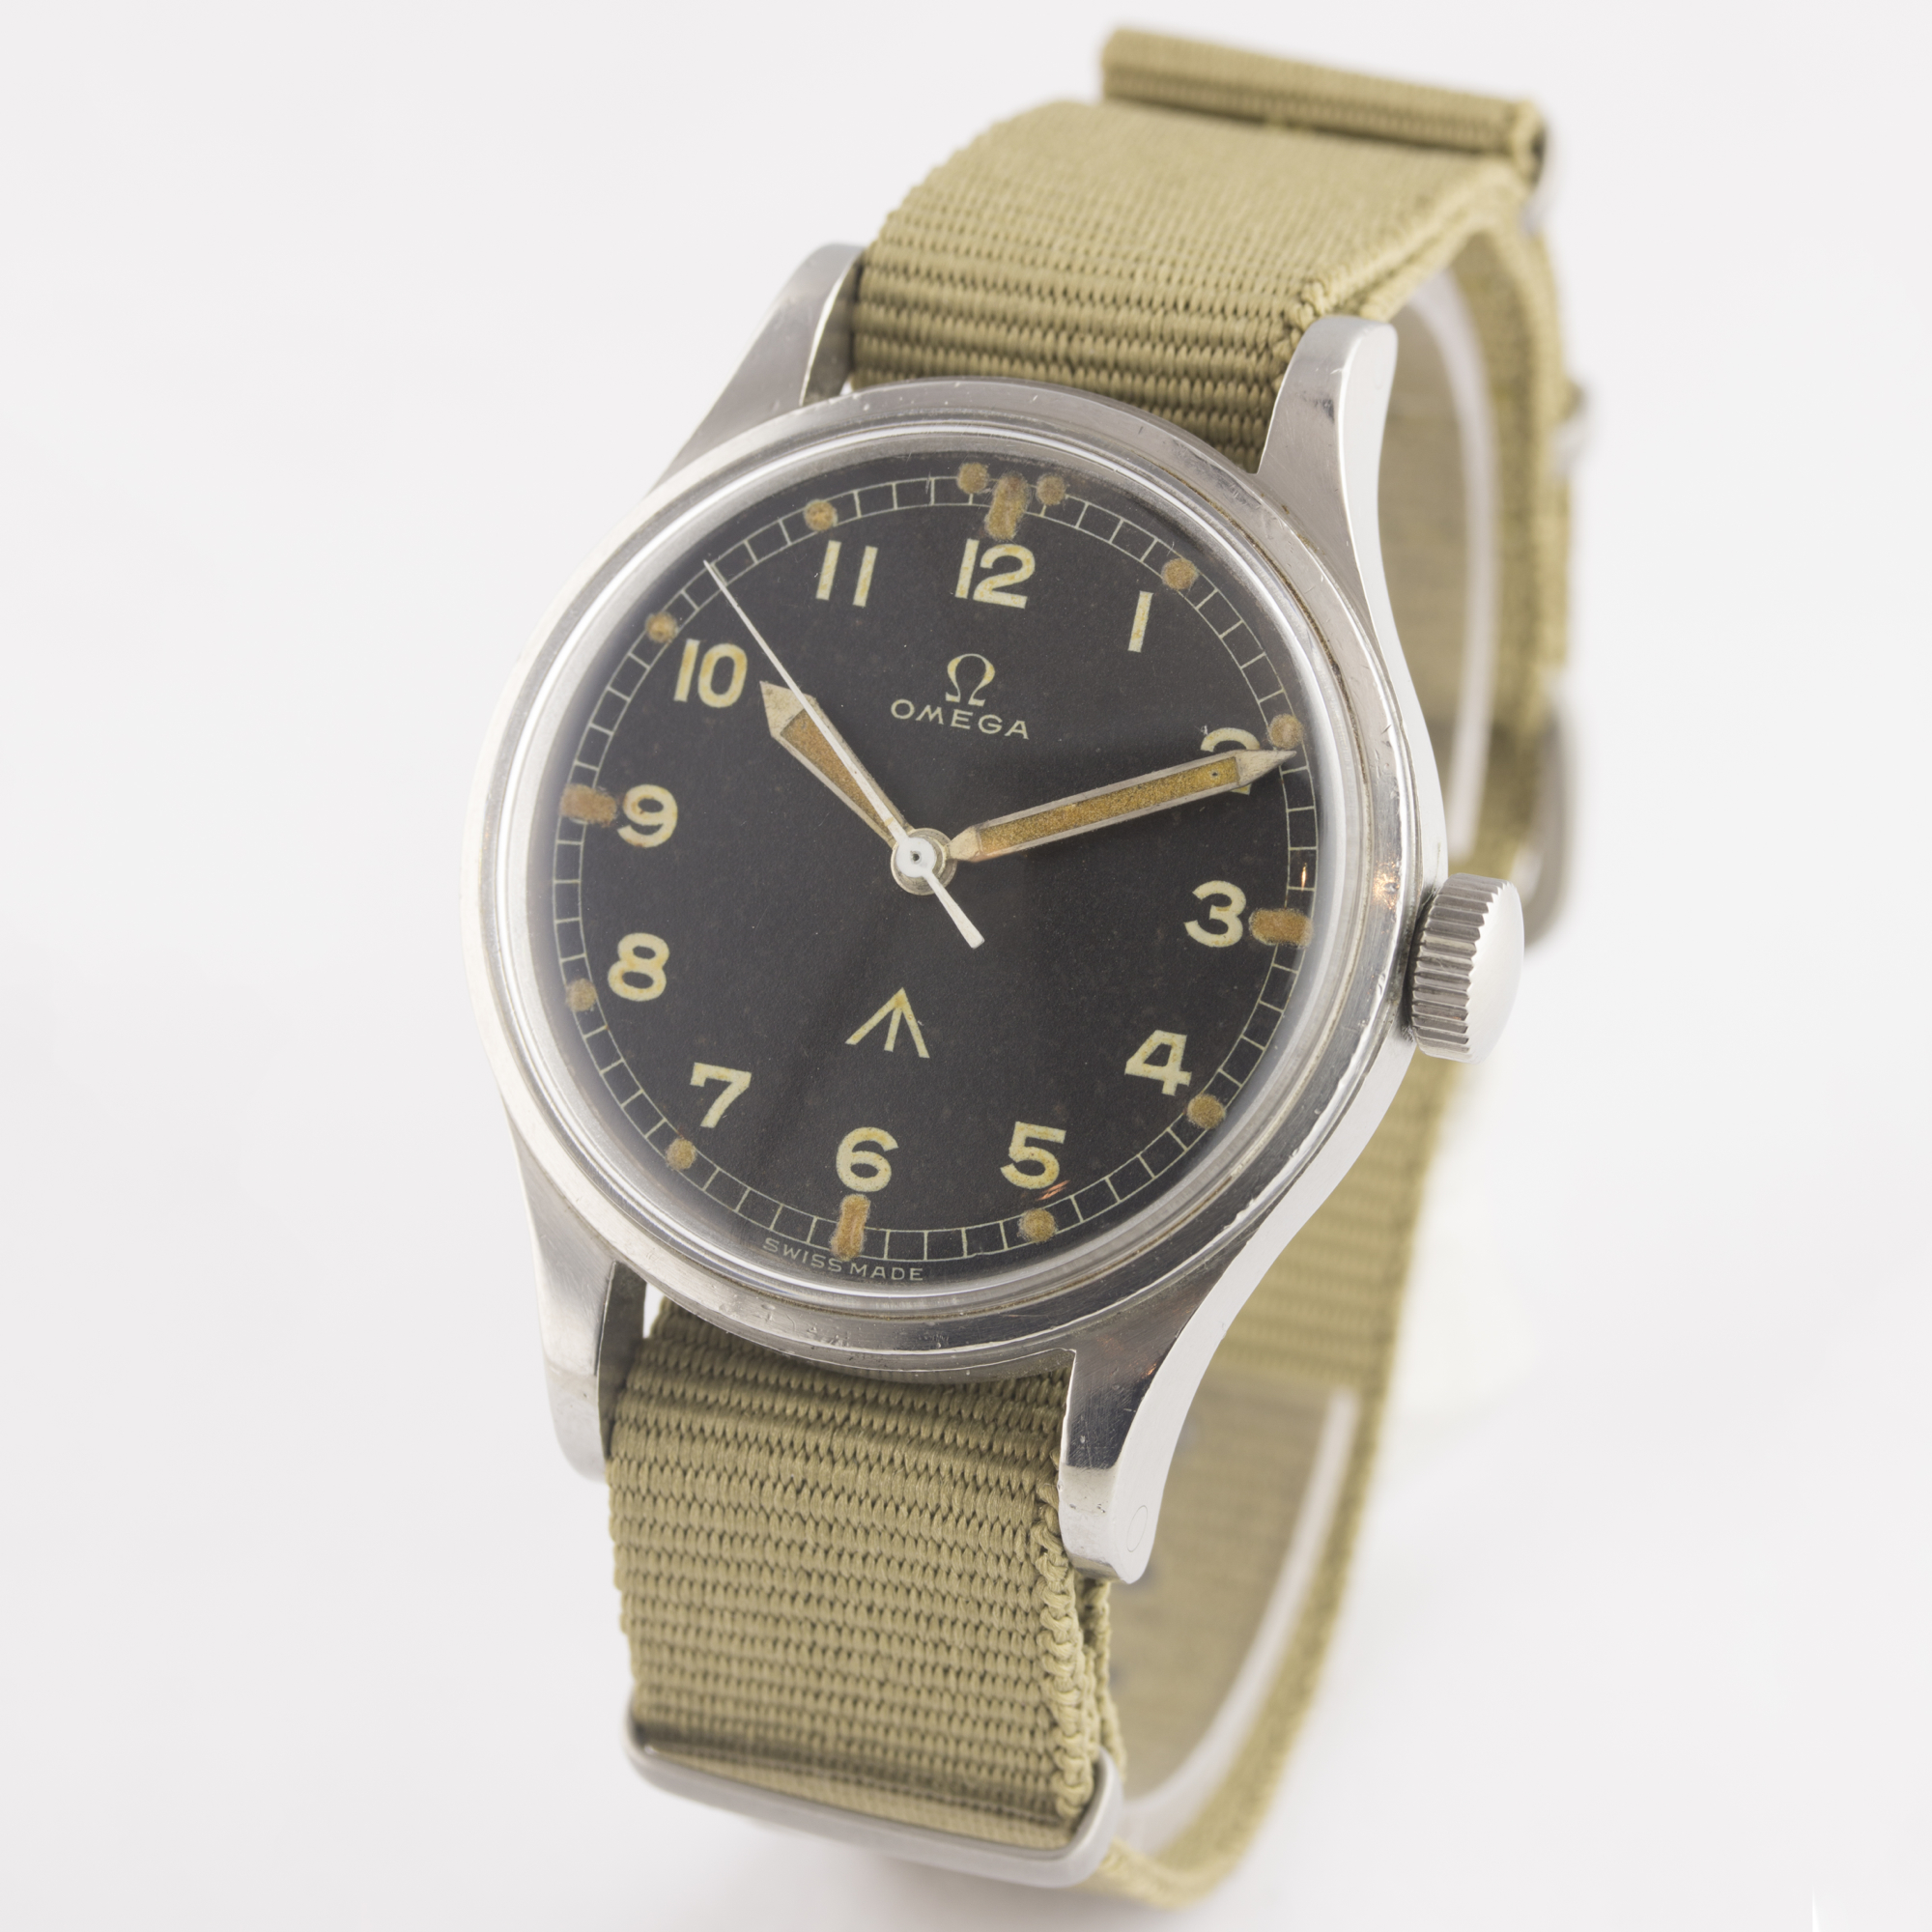 A VERY RARE GENTLEMAN'S STAINLESS STEEL BRITISH MILITARY OMEGA RAF "THIN ARROW" PILOTS WRIST WATCH - Image 5 of 9